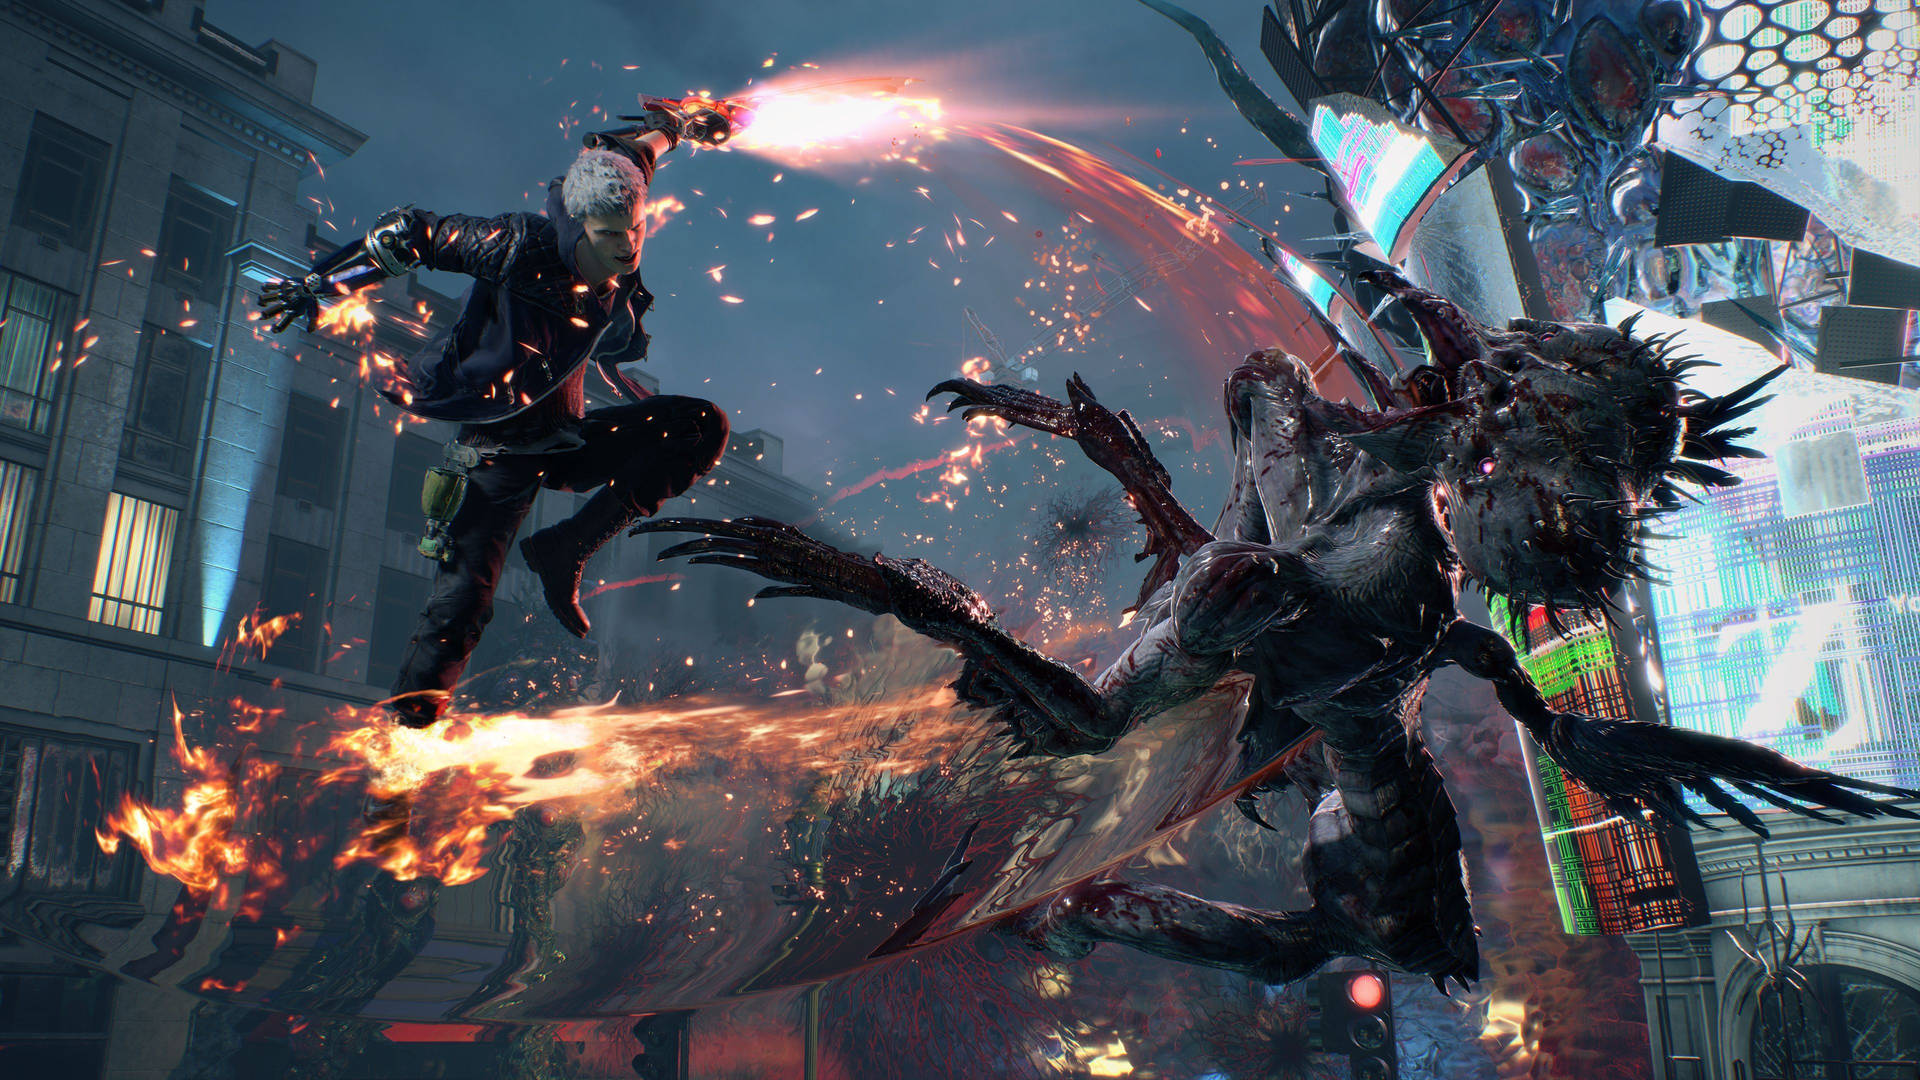 "Experience the Action of Devil May Cry 5" Wallpaper